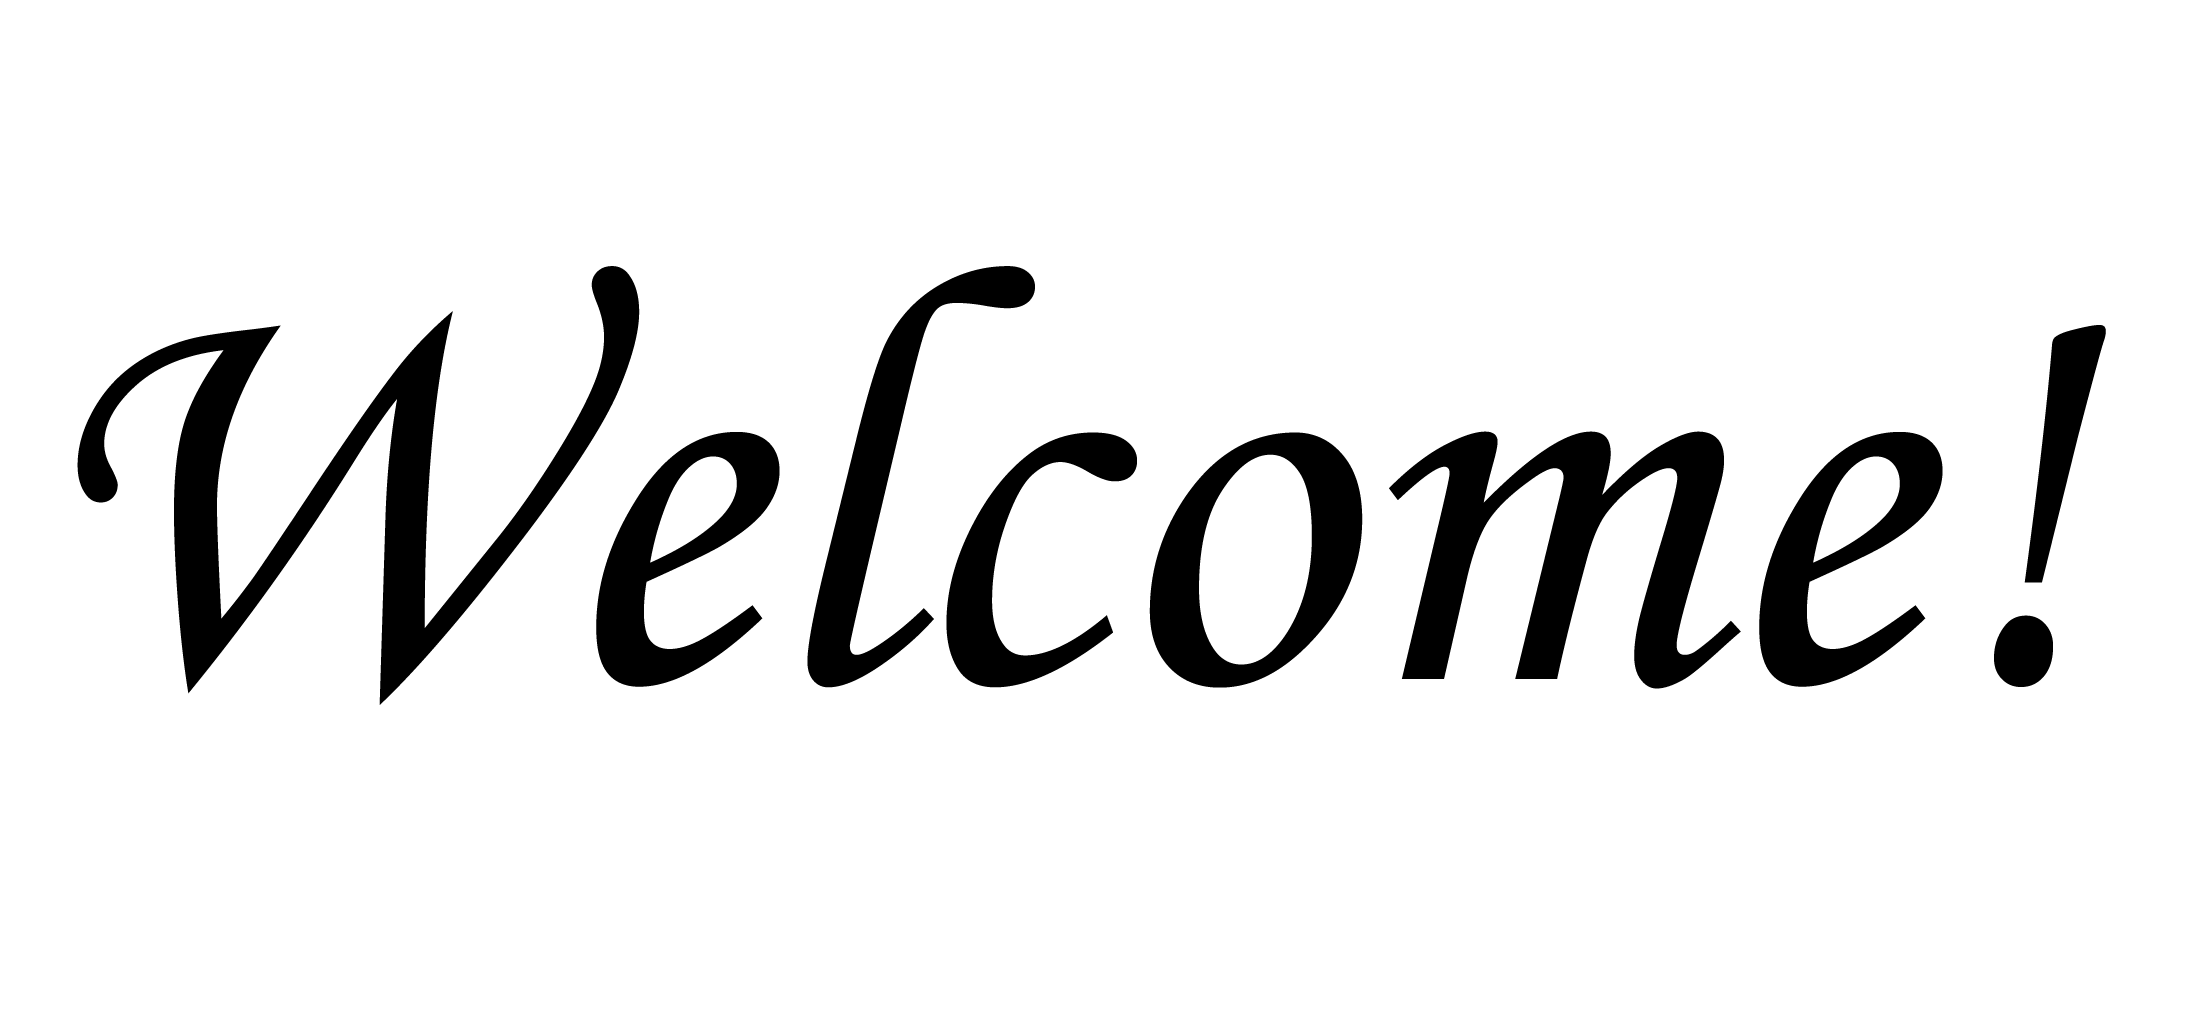 Welcome animated clip art clipart clipartcow